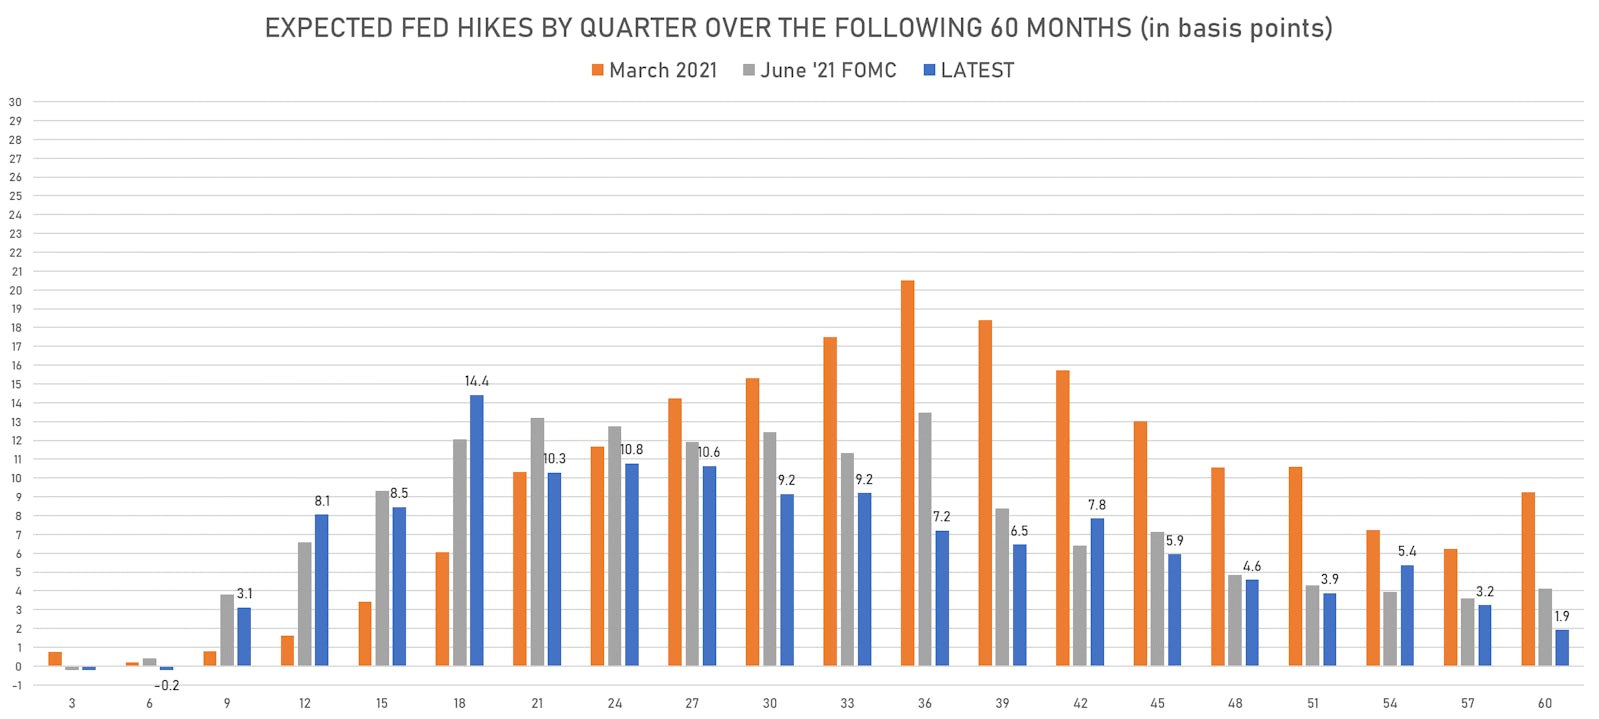 Implied Timing Of Hikes Derived From The 3-Month USD OIS Forward Curve | Sources: ϕpost, Refinitiv data